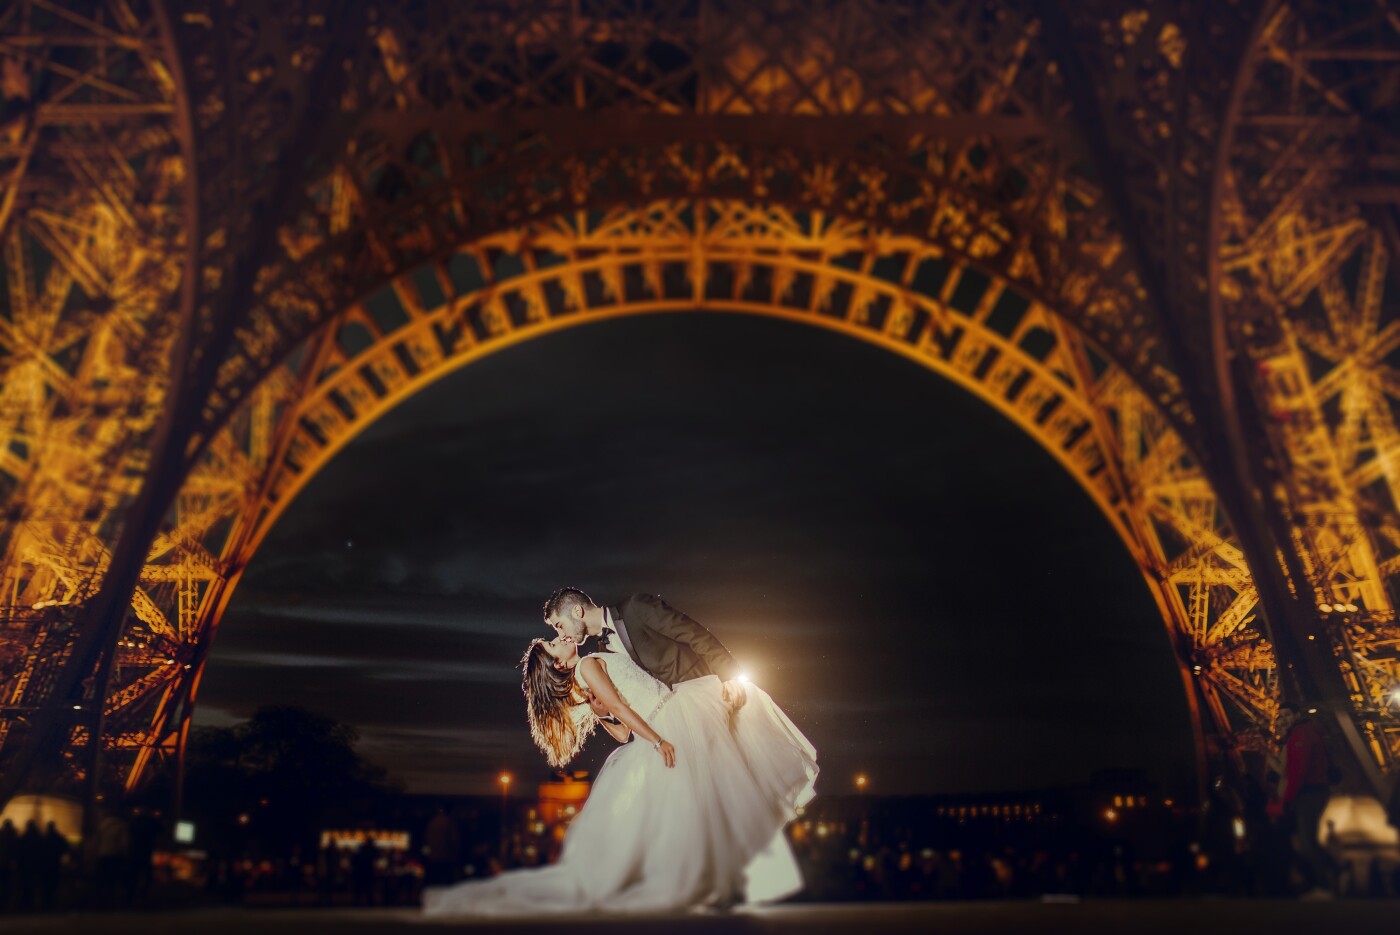 This "trash the dress" shooting was done in the city of love,París. We had a long long shooting day from 11am until 11pm traveling through all the most important places of this awesome city and finally having this nigh shoot in the Eiffel Tower. A nikon d800 and a 35mm lens were used in this photo,including a back flash to add a bit more magic to the shoot.